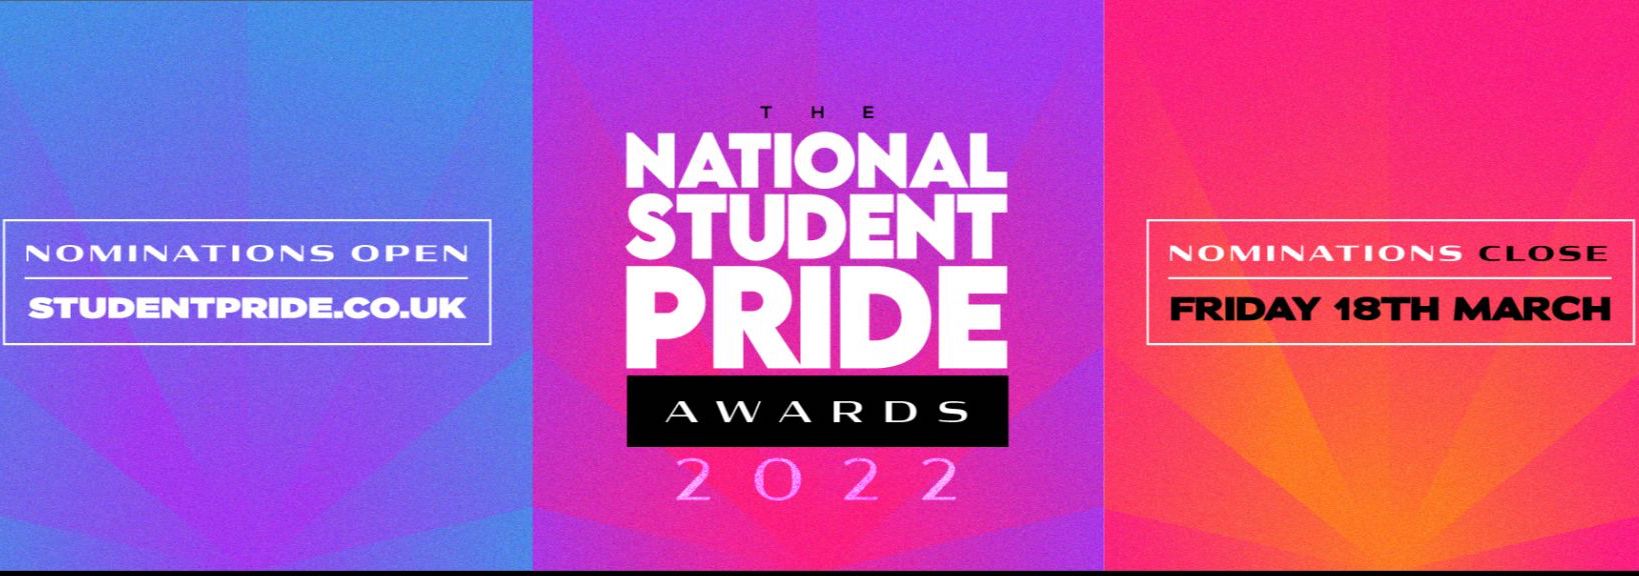 Nominations open for National Student Pride Awards 2022